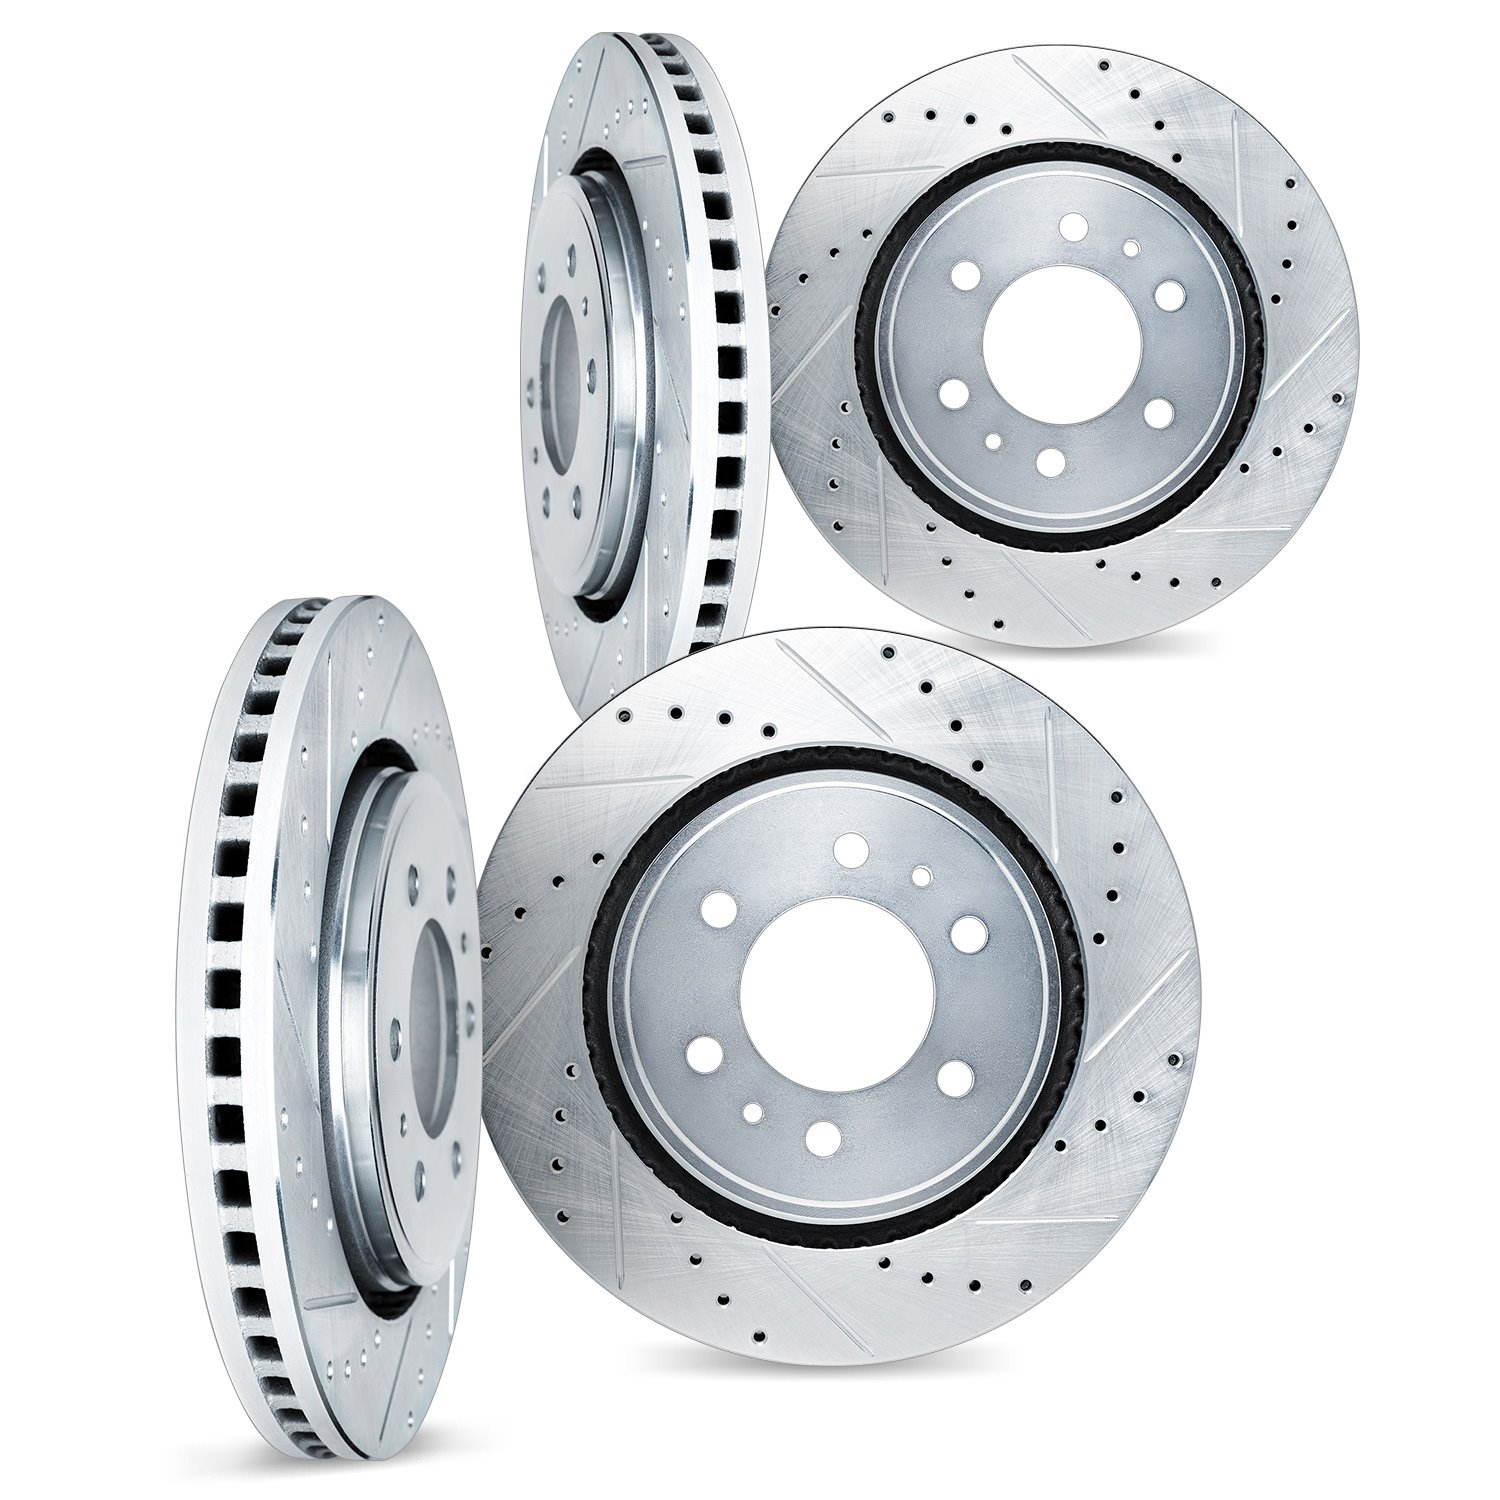 7004-47105 Drilled/Slotted Brake Rotors [Silver], Fits Select GM, Position: Front and Rear